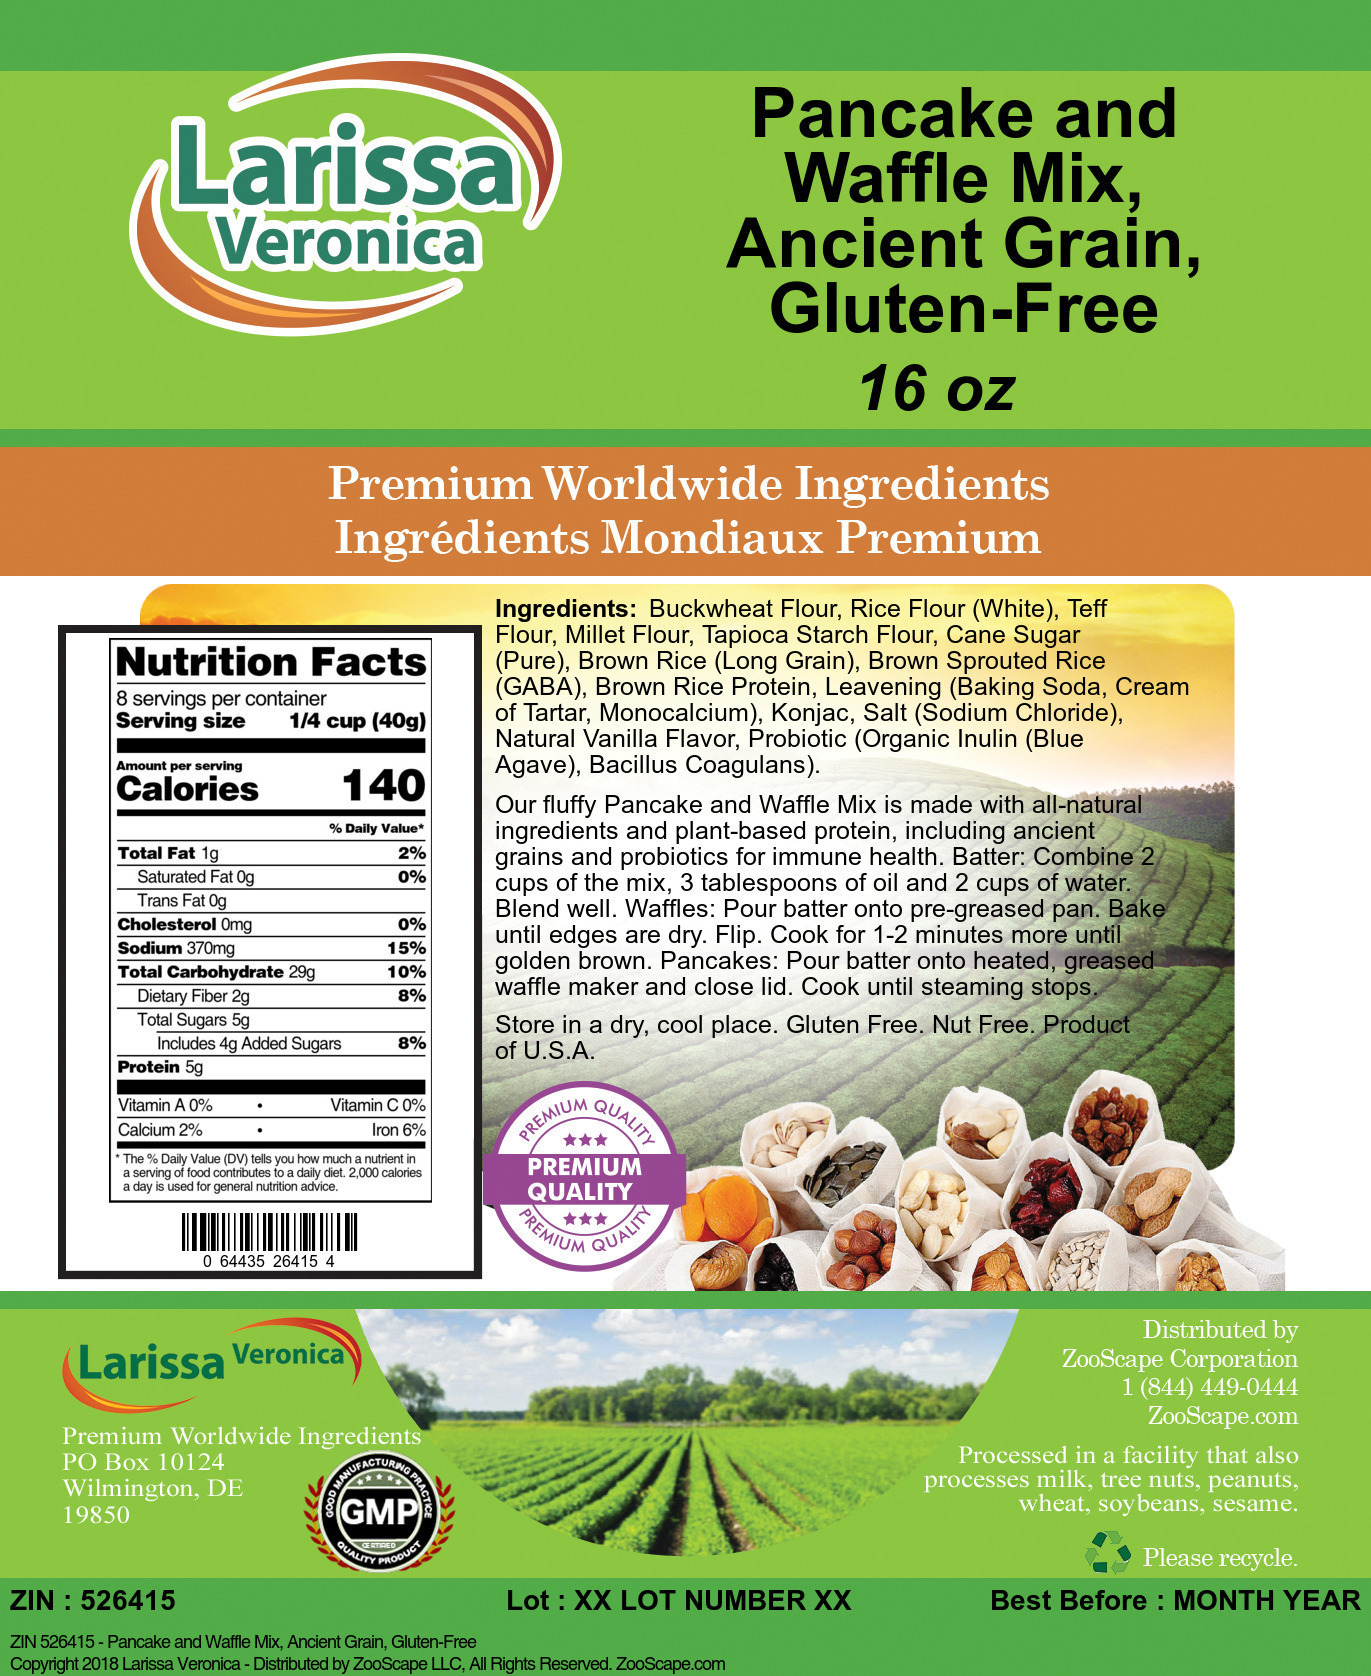 Pancake and Waffle Mix, Ancient Grain, Gluten-Free - Label